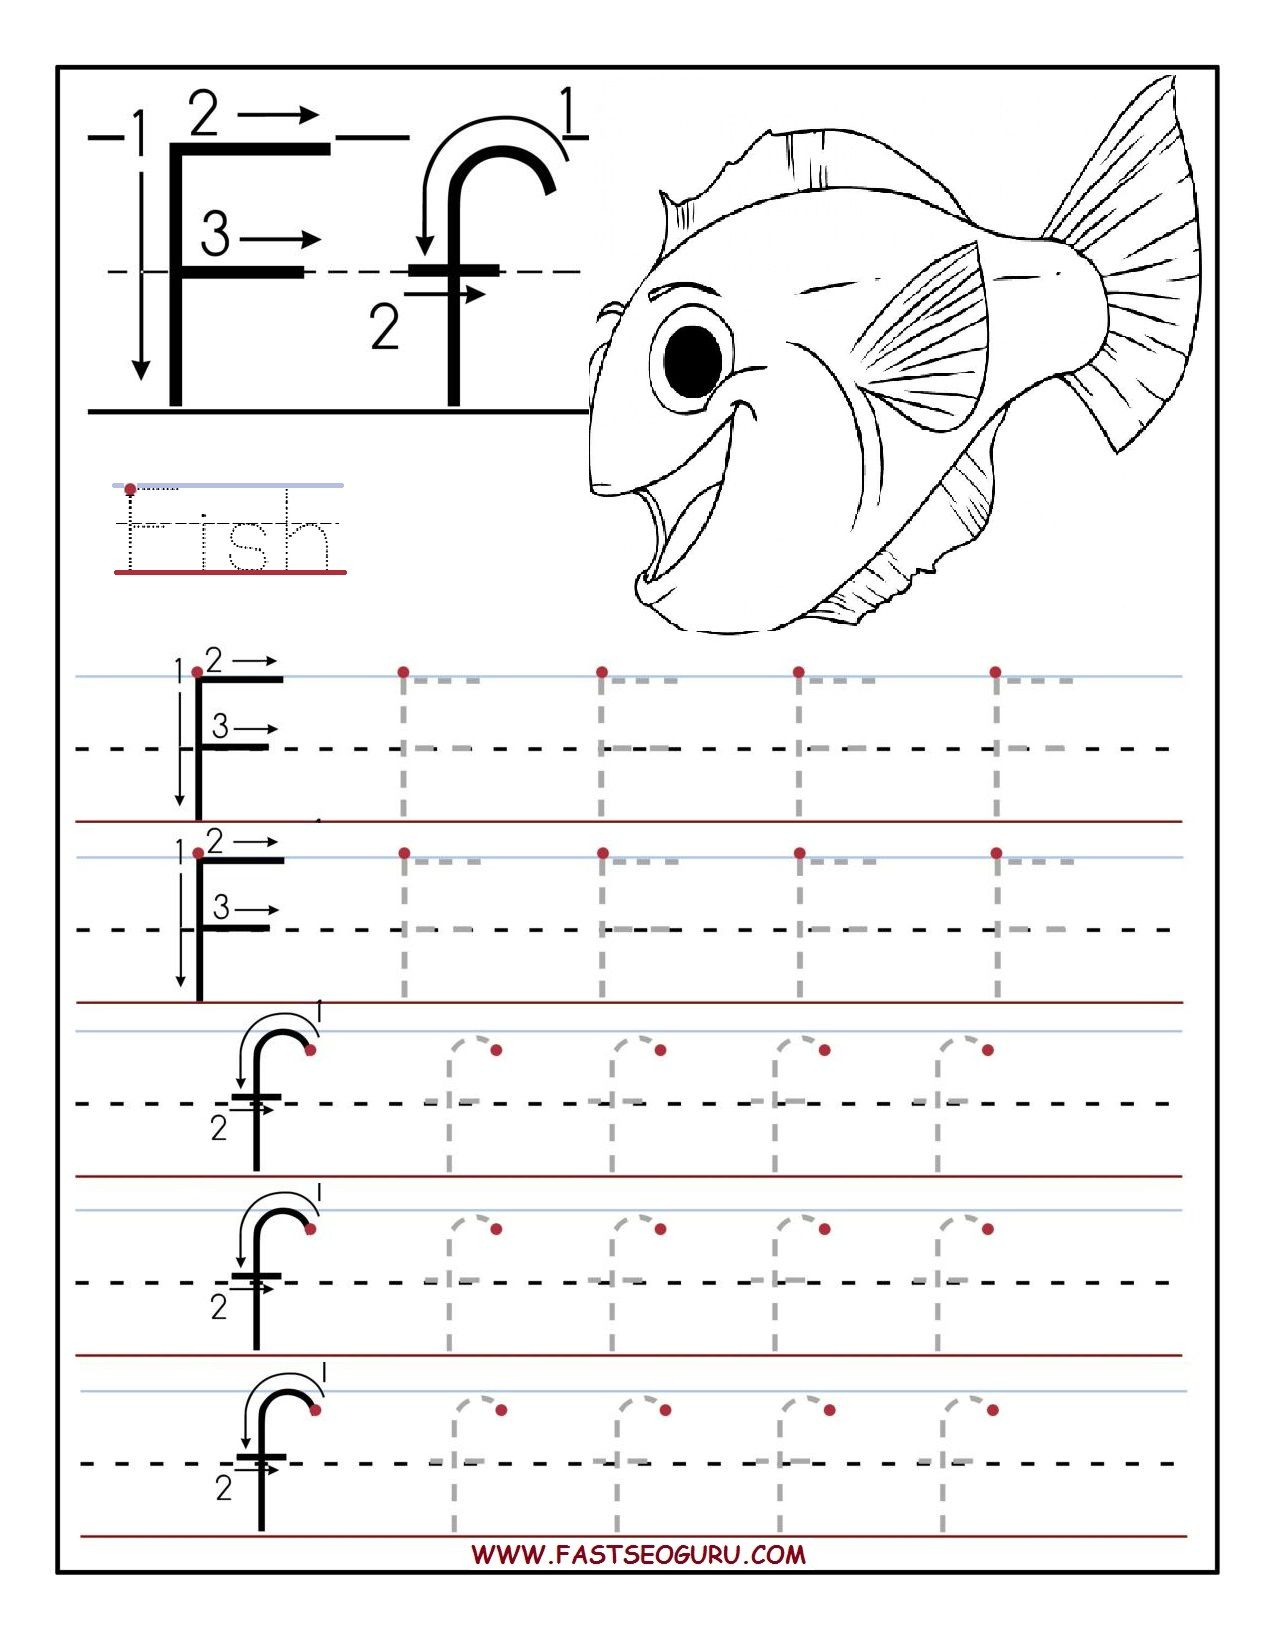 Printable Letter F Tracing Worksheets For Preschool inside Tracing Letter F Worksheets